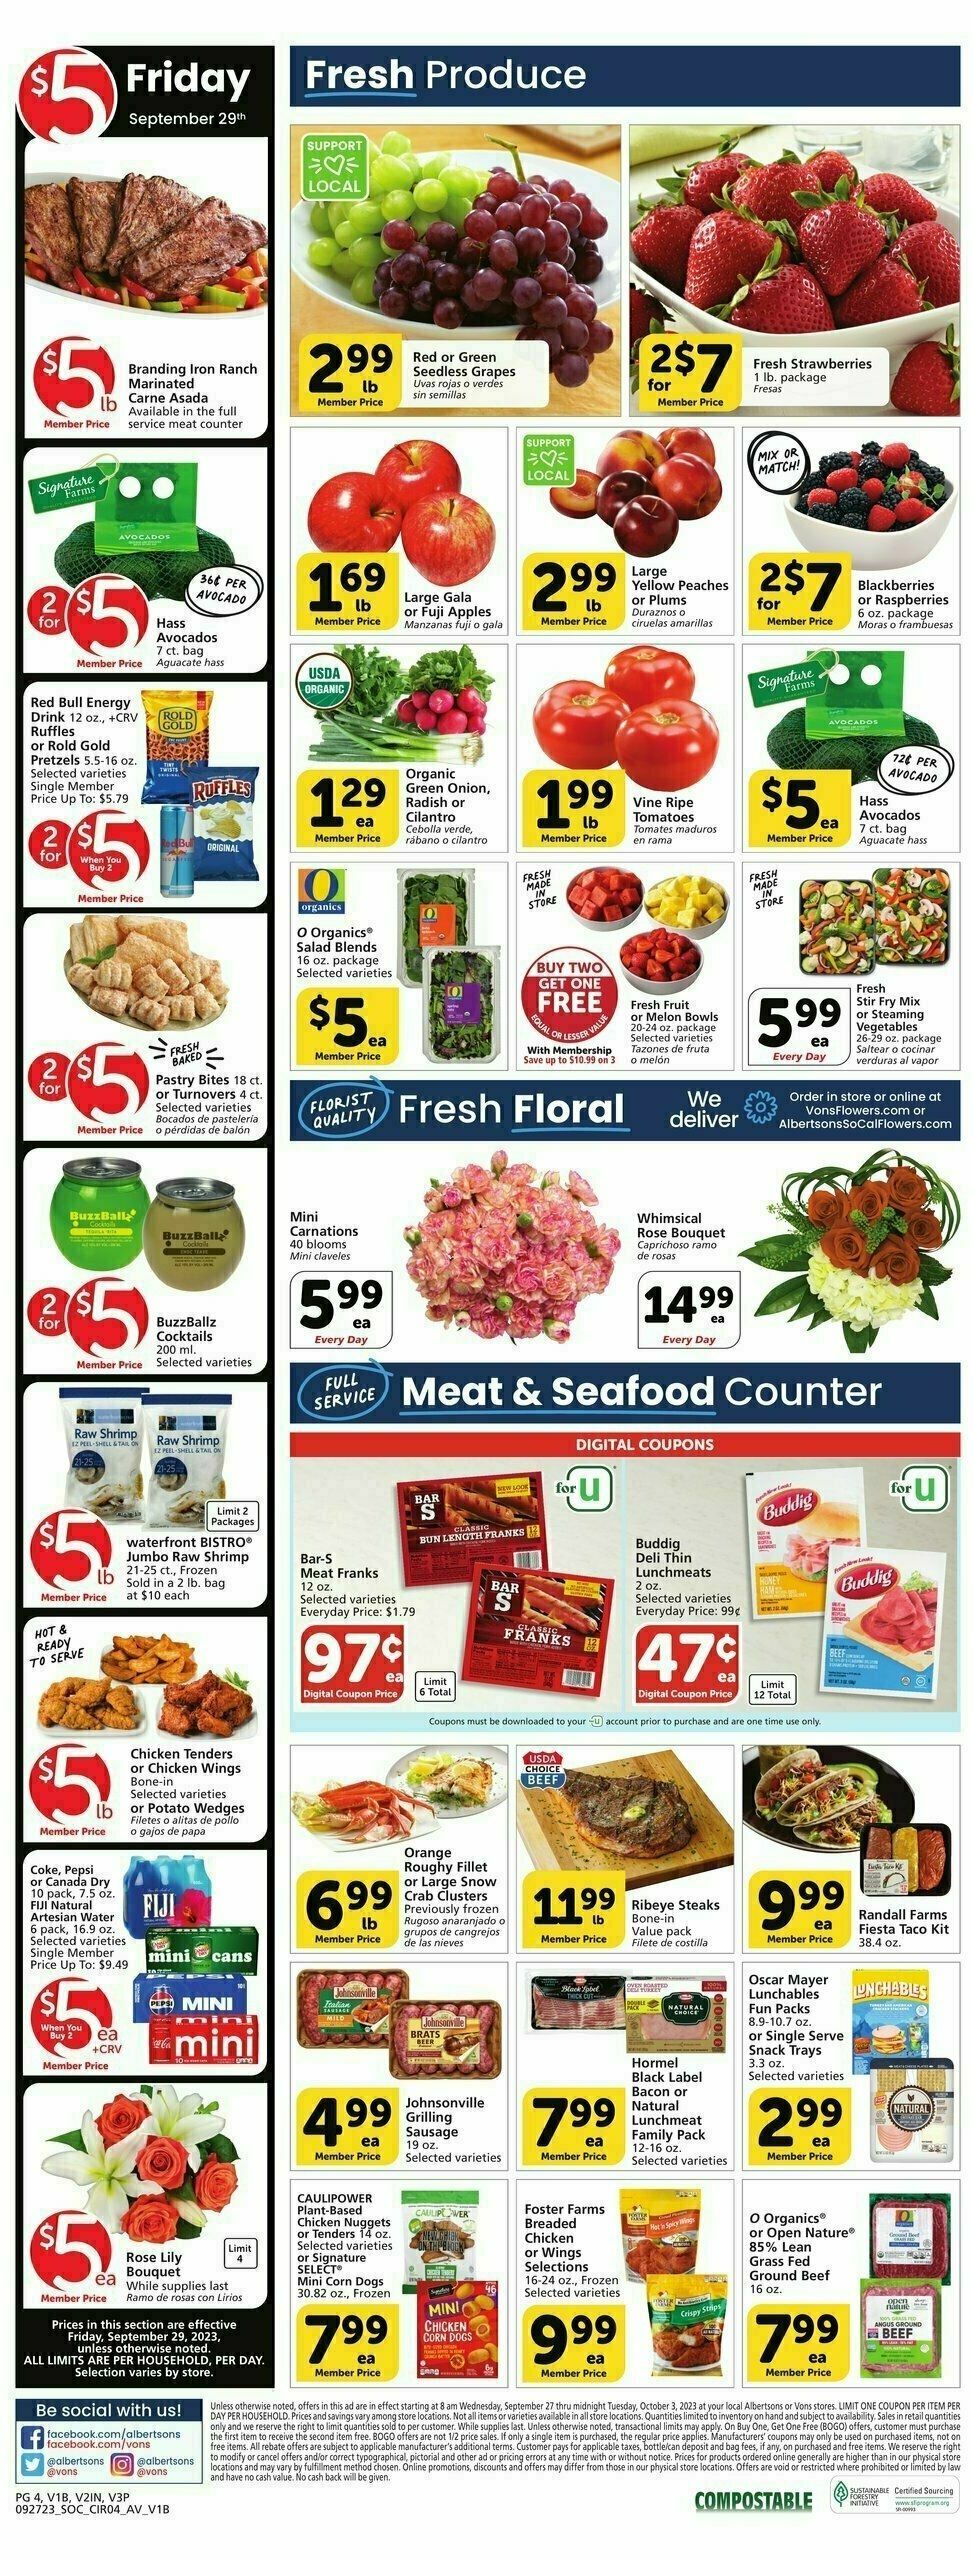 Vons Weekly Ad from September 27